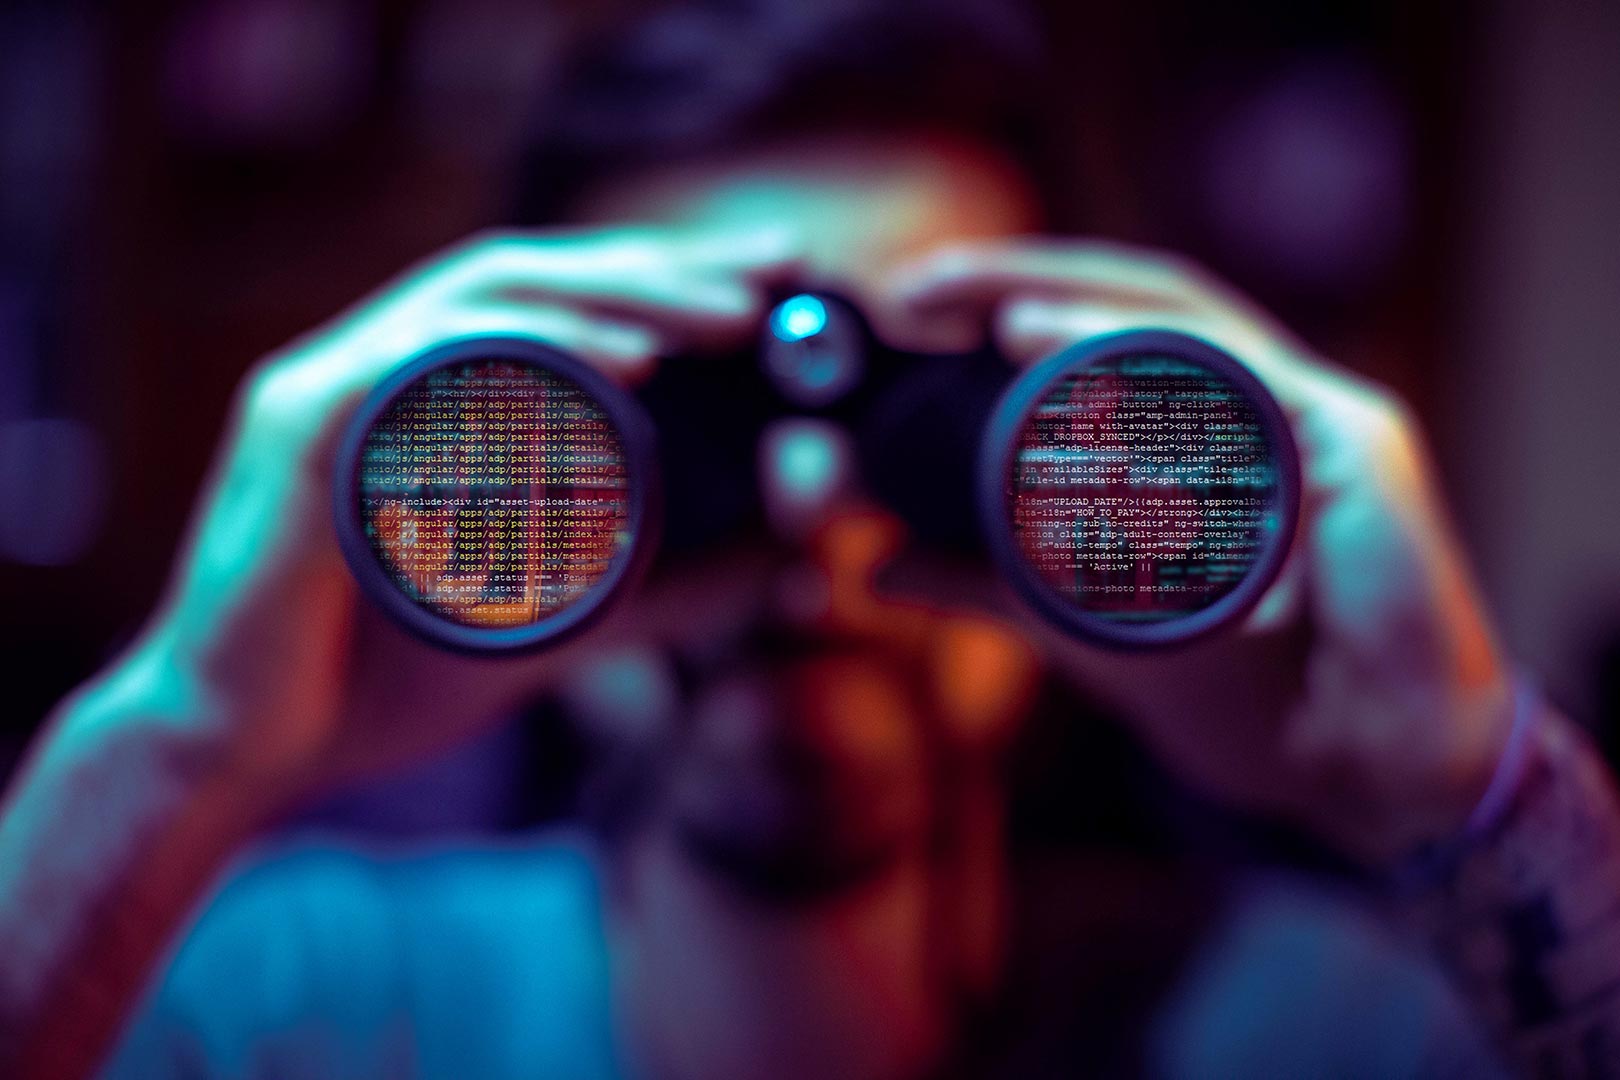 Conceptual image of someone using binoculars to look at data.